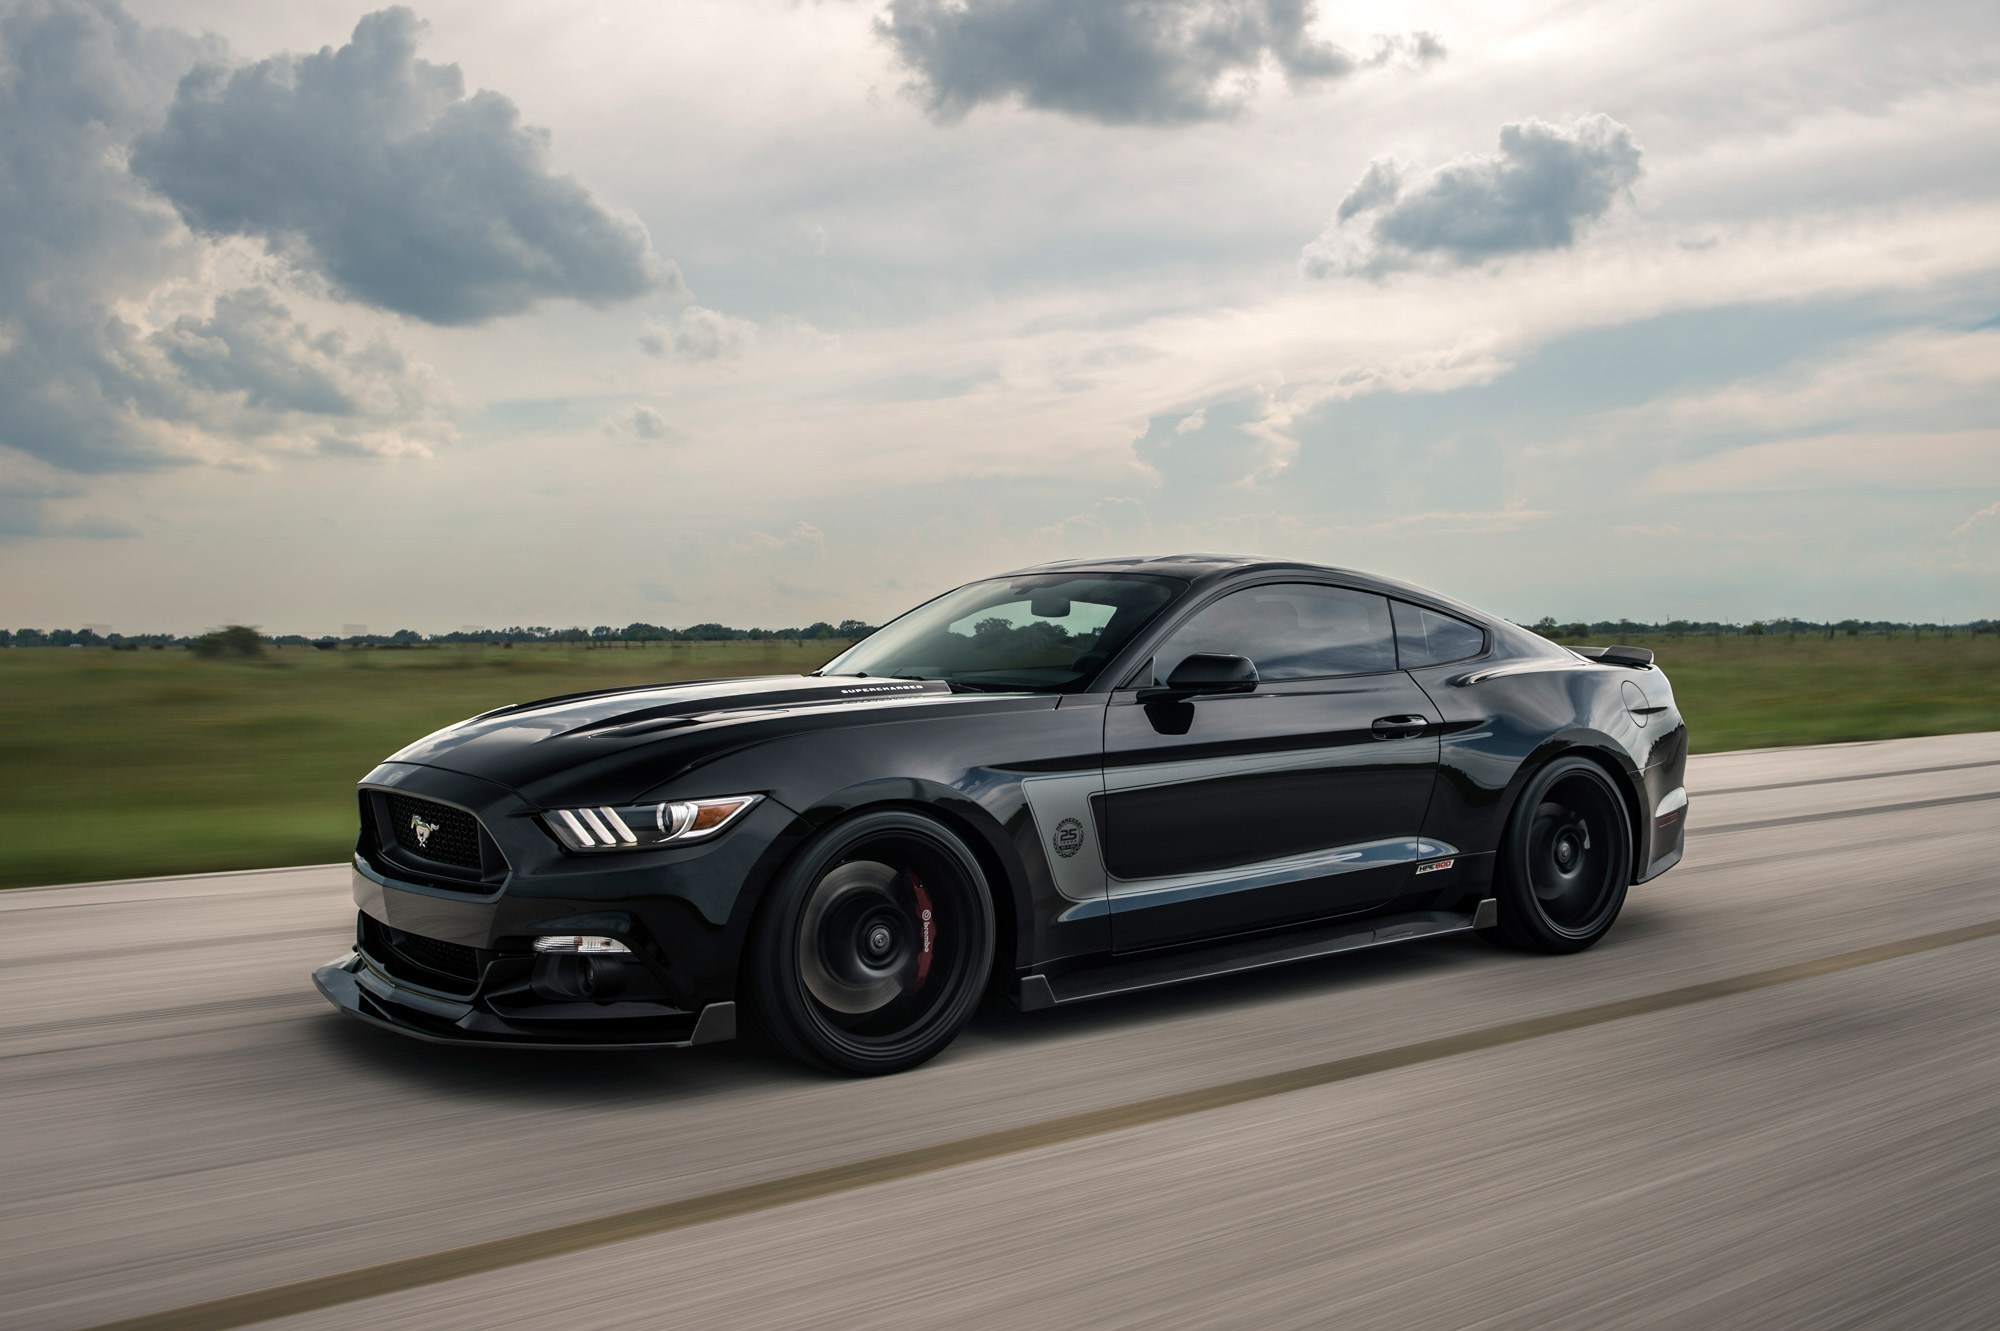 Mustang GT Hennessey 25th Anniversary Edition HPE800